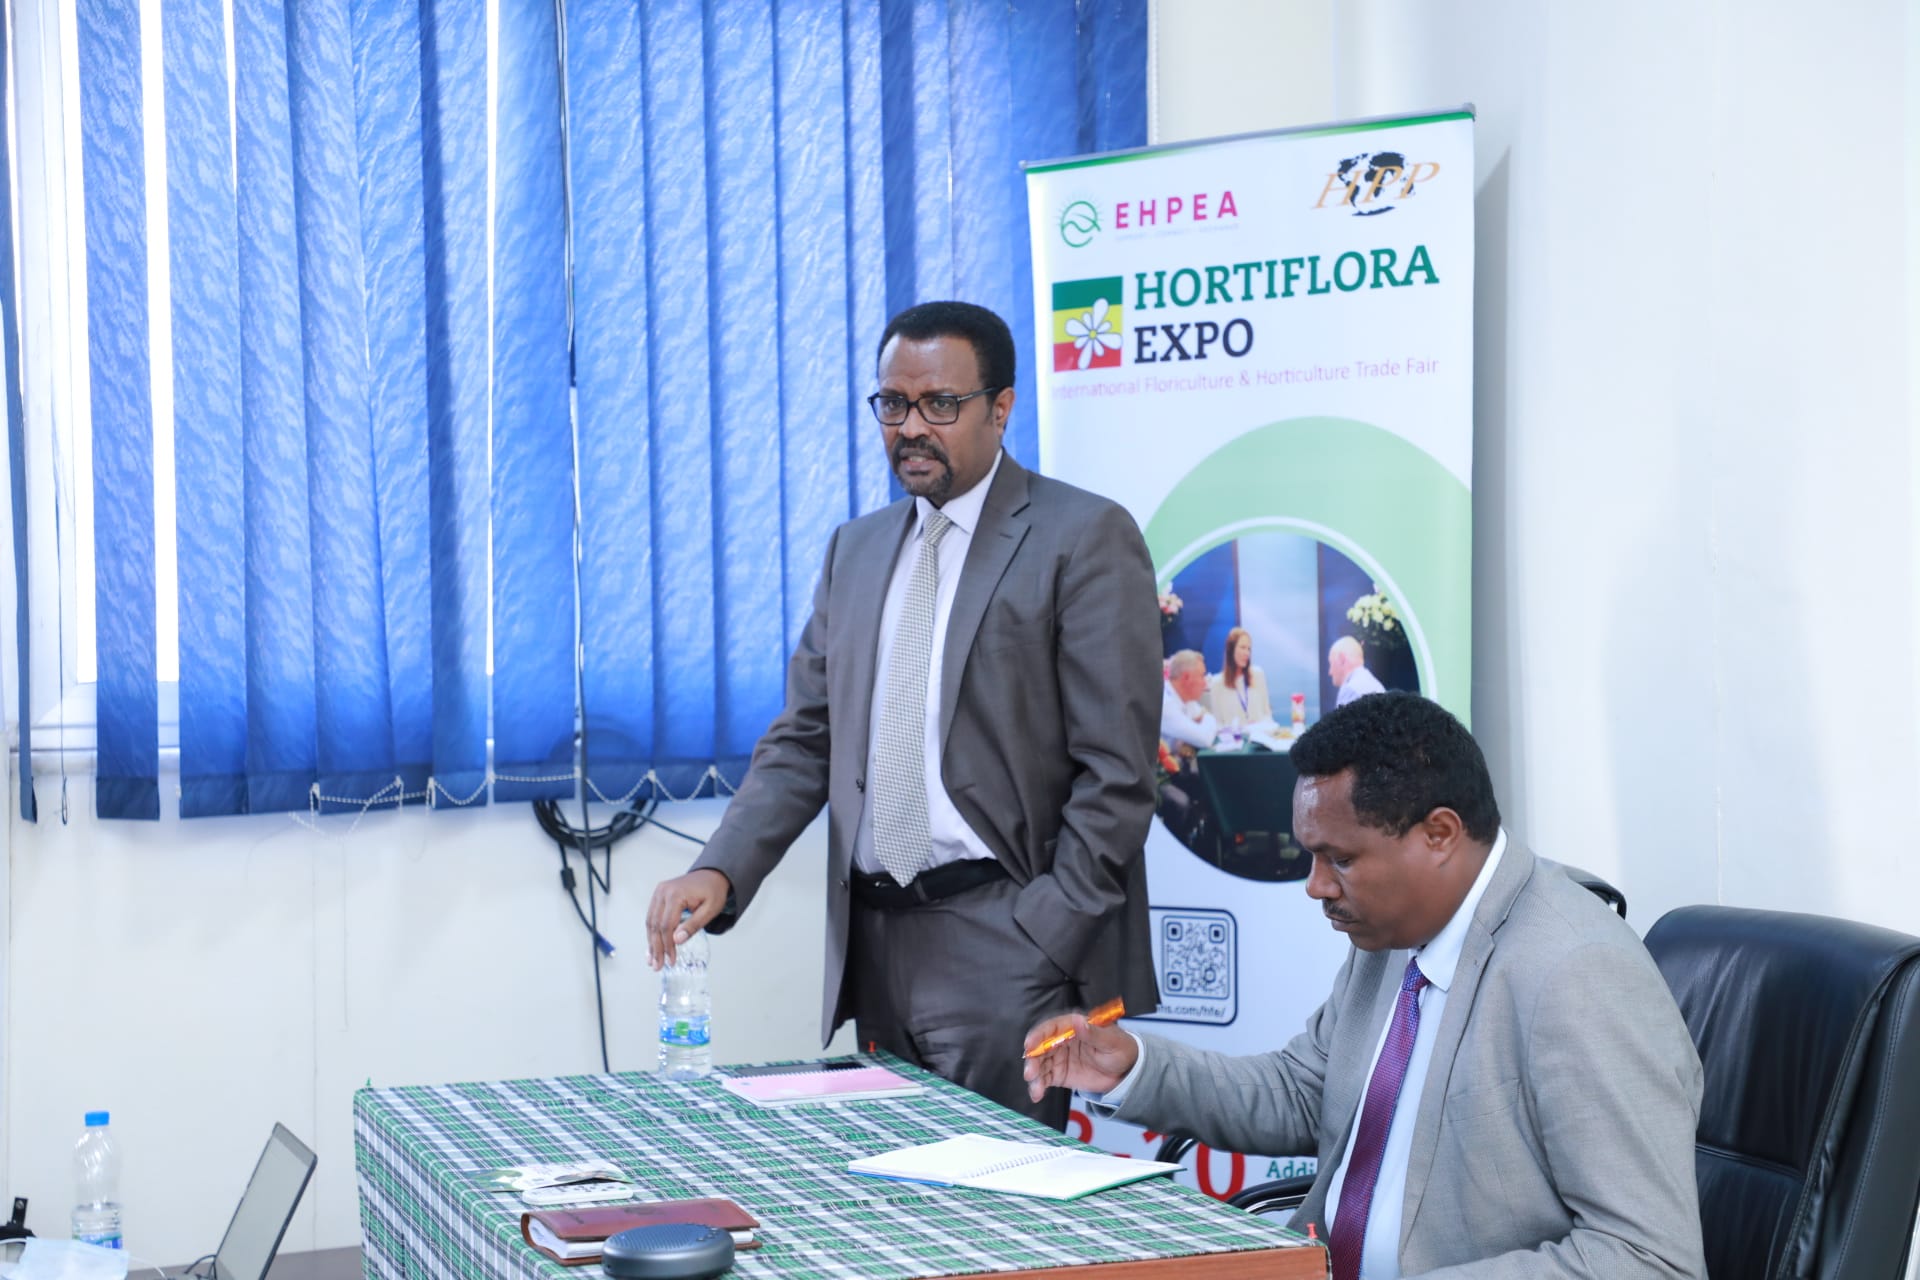 A meeting was held on the findings of an assessment conducted by Ethiopian Agricultural Authority (EAA)